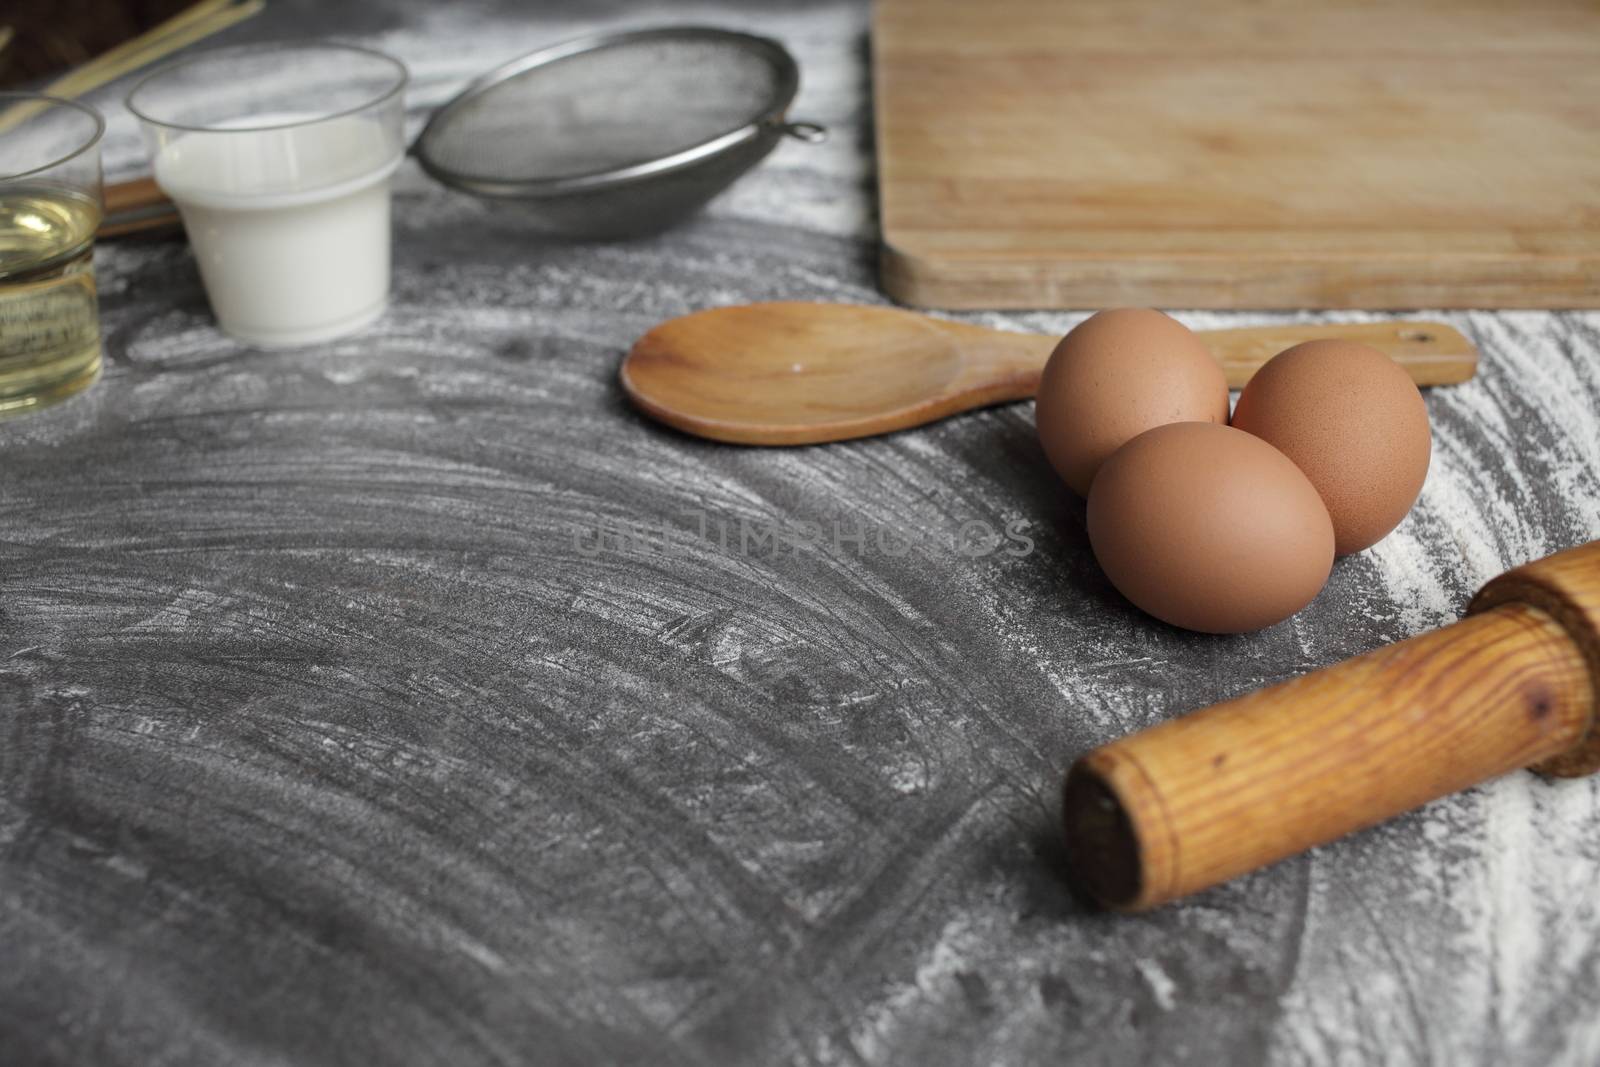 Chicken egg, flour, olive oil, milk, wheat ears, kitchen tool on gray table background. Products for baking bakery products. Cutting board, rolling pin, flour sieve, wooden spoon. For bread or cake